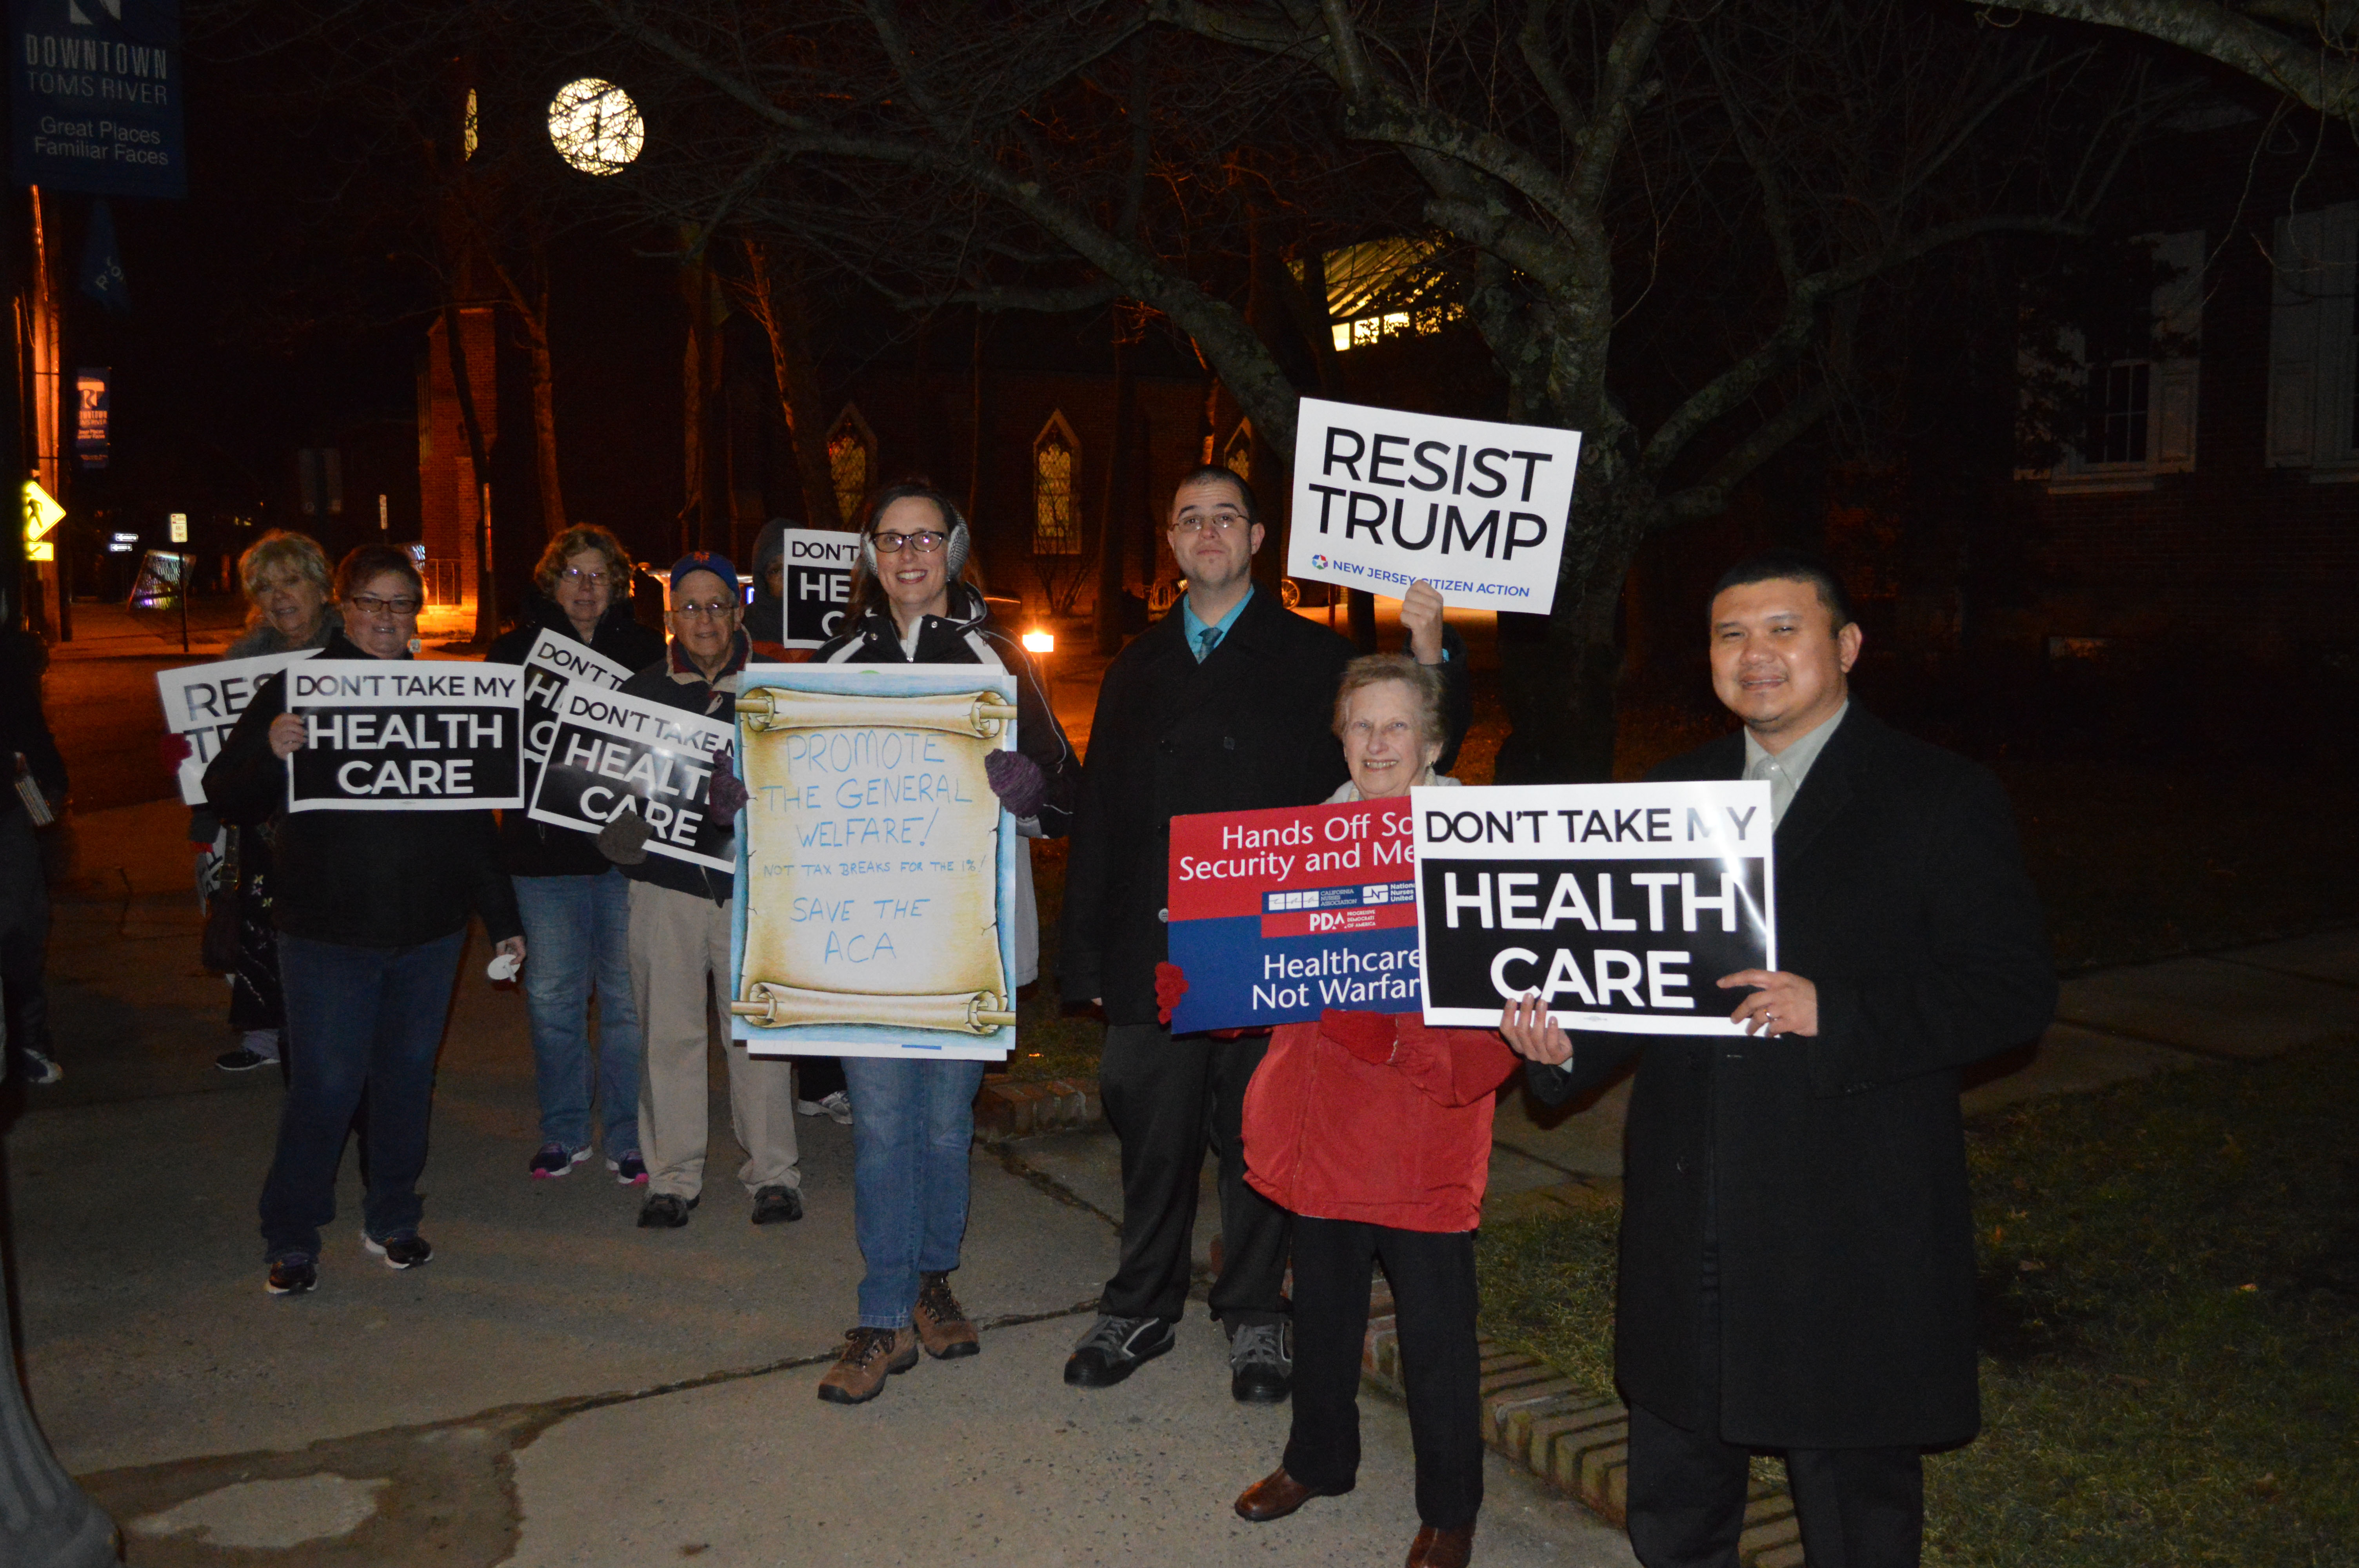 A protest over the potential repeal of the Affordable Care Act in downtown Toms River, Jan. 18, 2017. (Photo: Daniel Nee)